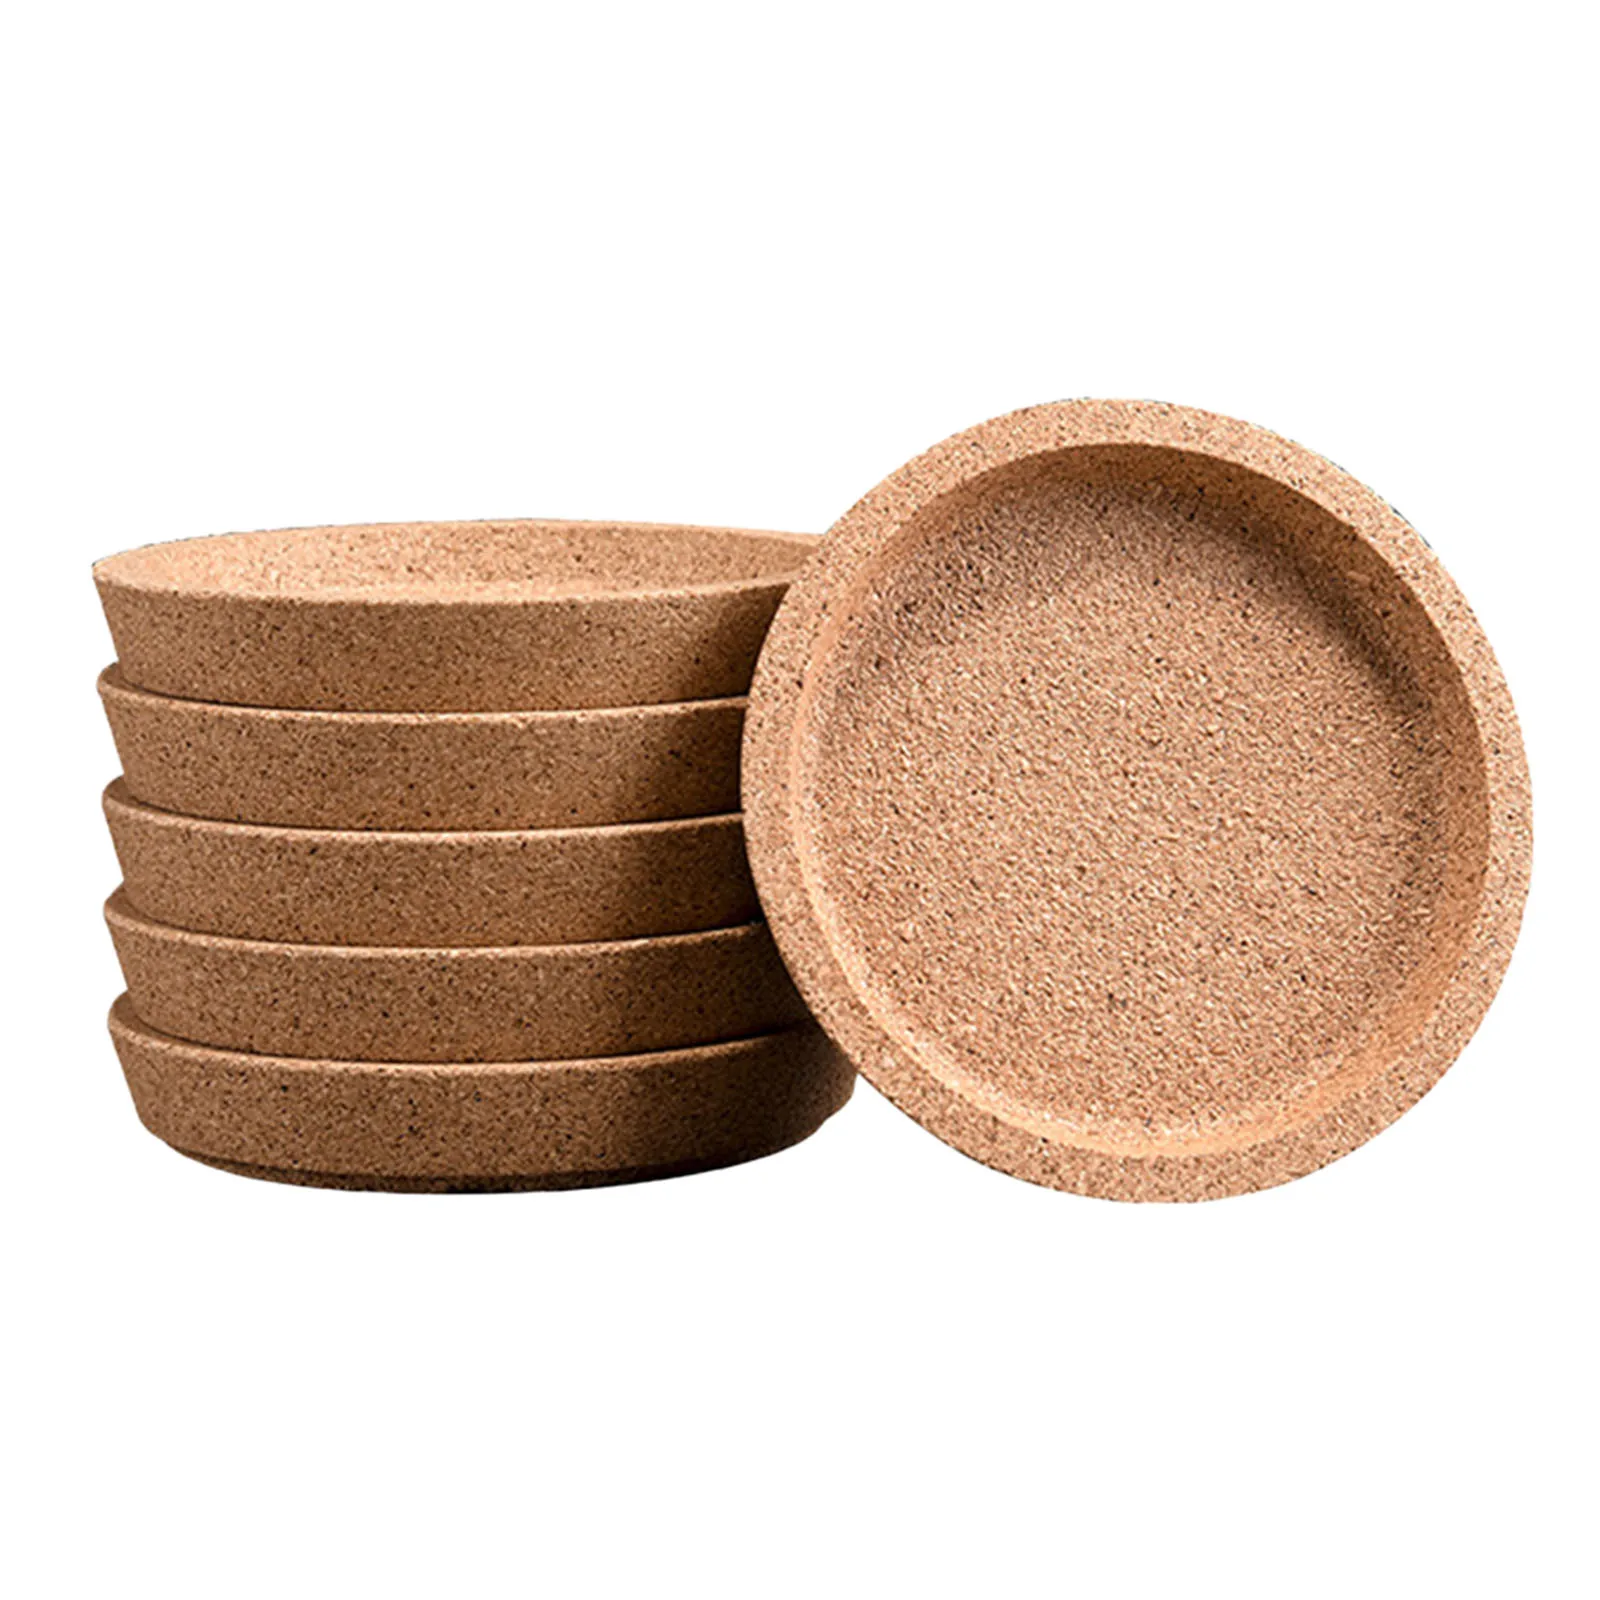 

6 Pcs Cork Cup Coasters Tea Coffee Mug Drinks Holder For Kitchen Natural Wooden Mat Tableware Round Drink Coaster 1.8cm Thick